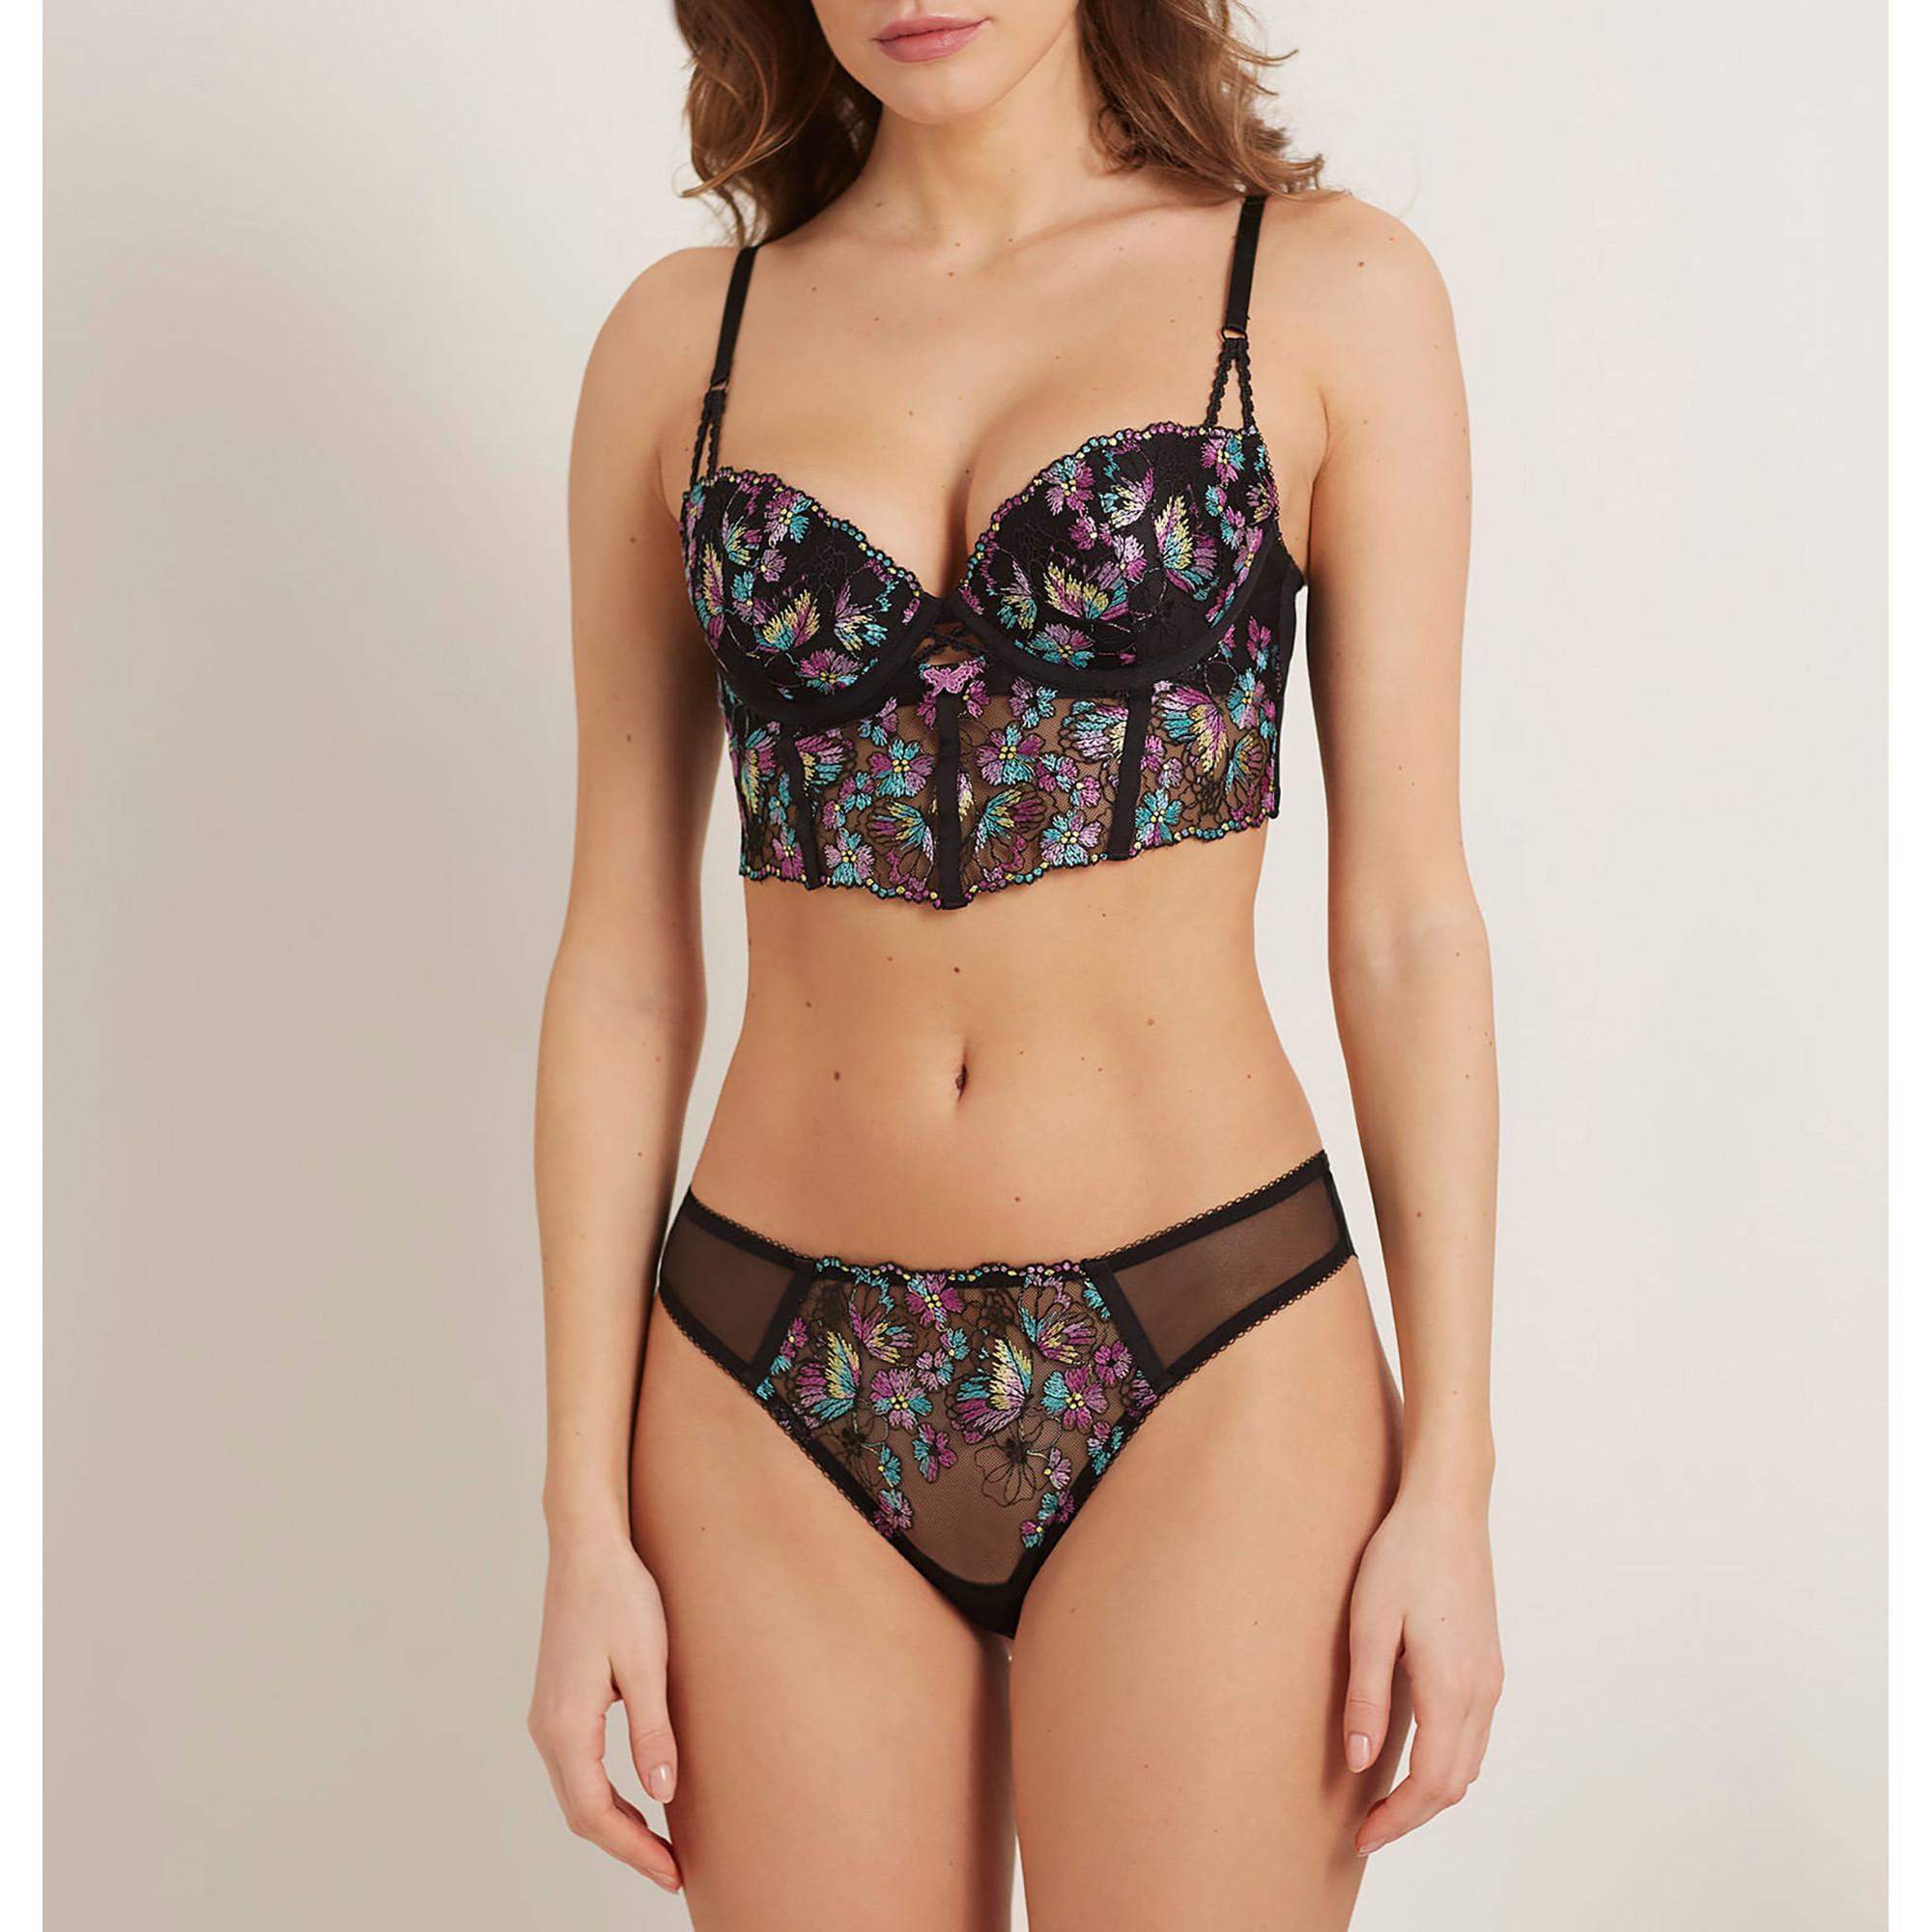 Yamamay  Soutien-gorge 